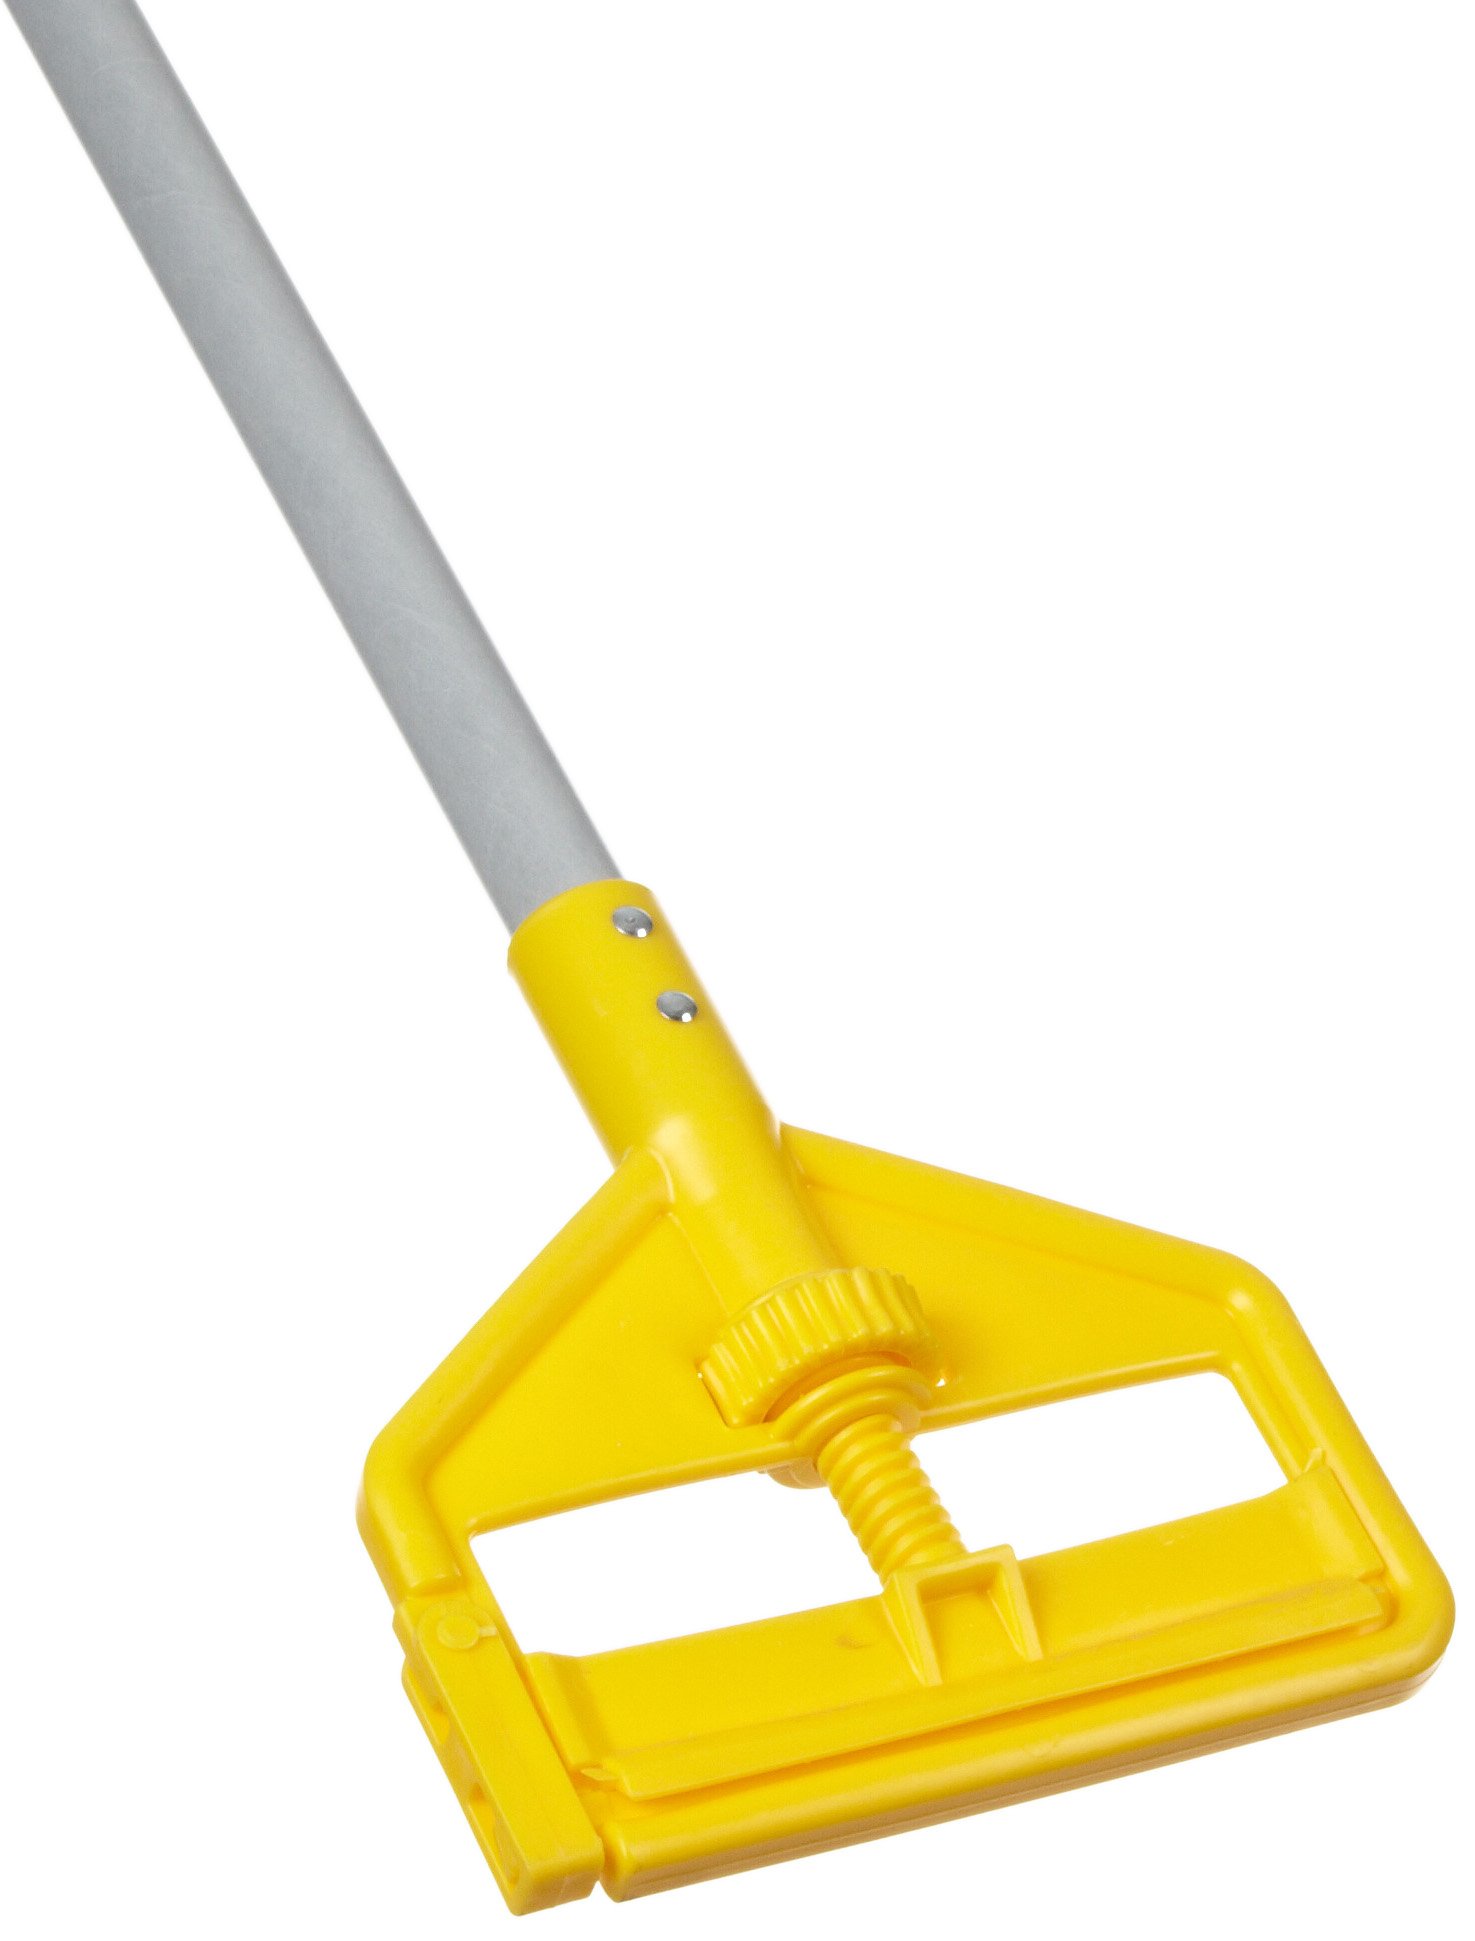 Rubbermaid Commercial Products, Industrial Grade - Fiberglass Wet Mop Holder Handle Stick for Floor Cleaning Heavy Duty, 54-Inch, FGH145000000 Invader - Side Gate 54" Fiberglass